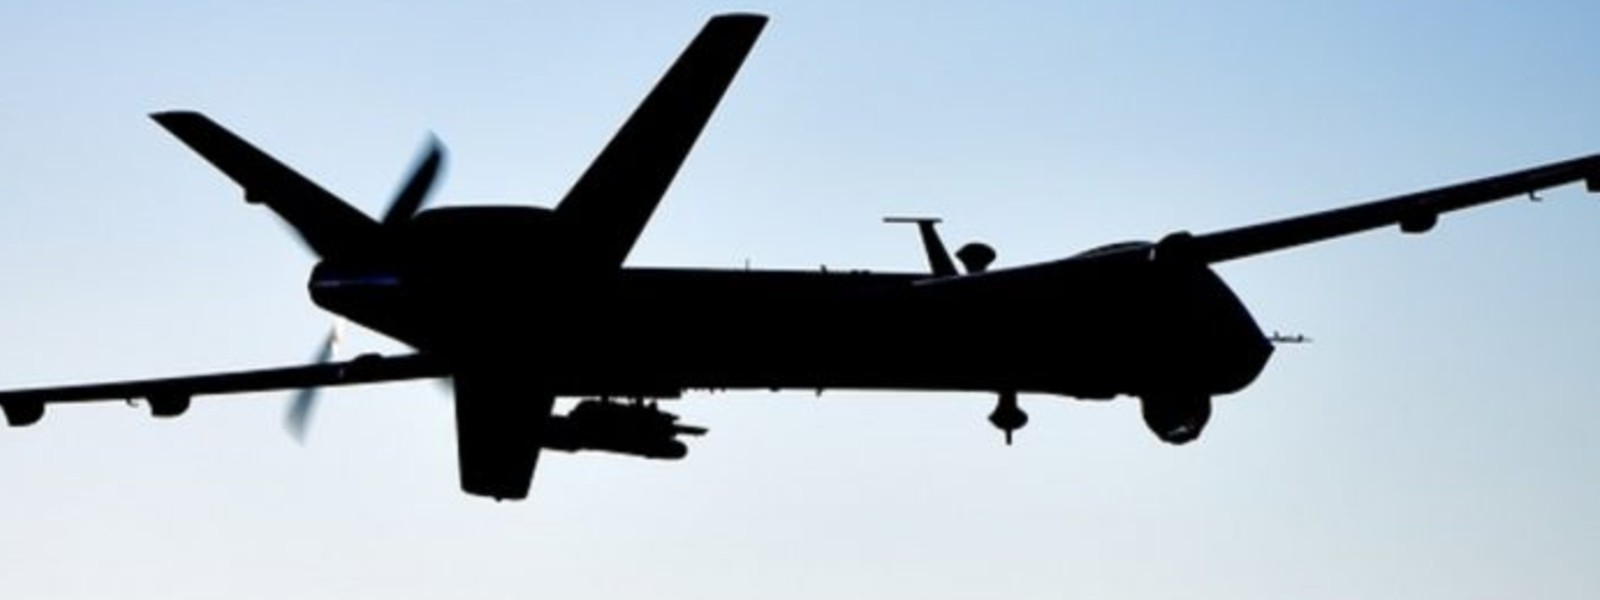 US launches drone strike targeting ISIS strategist